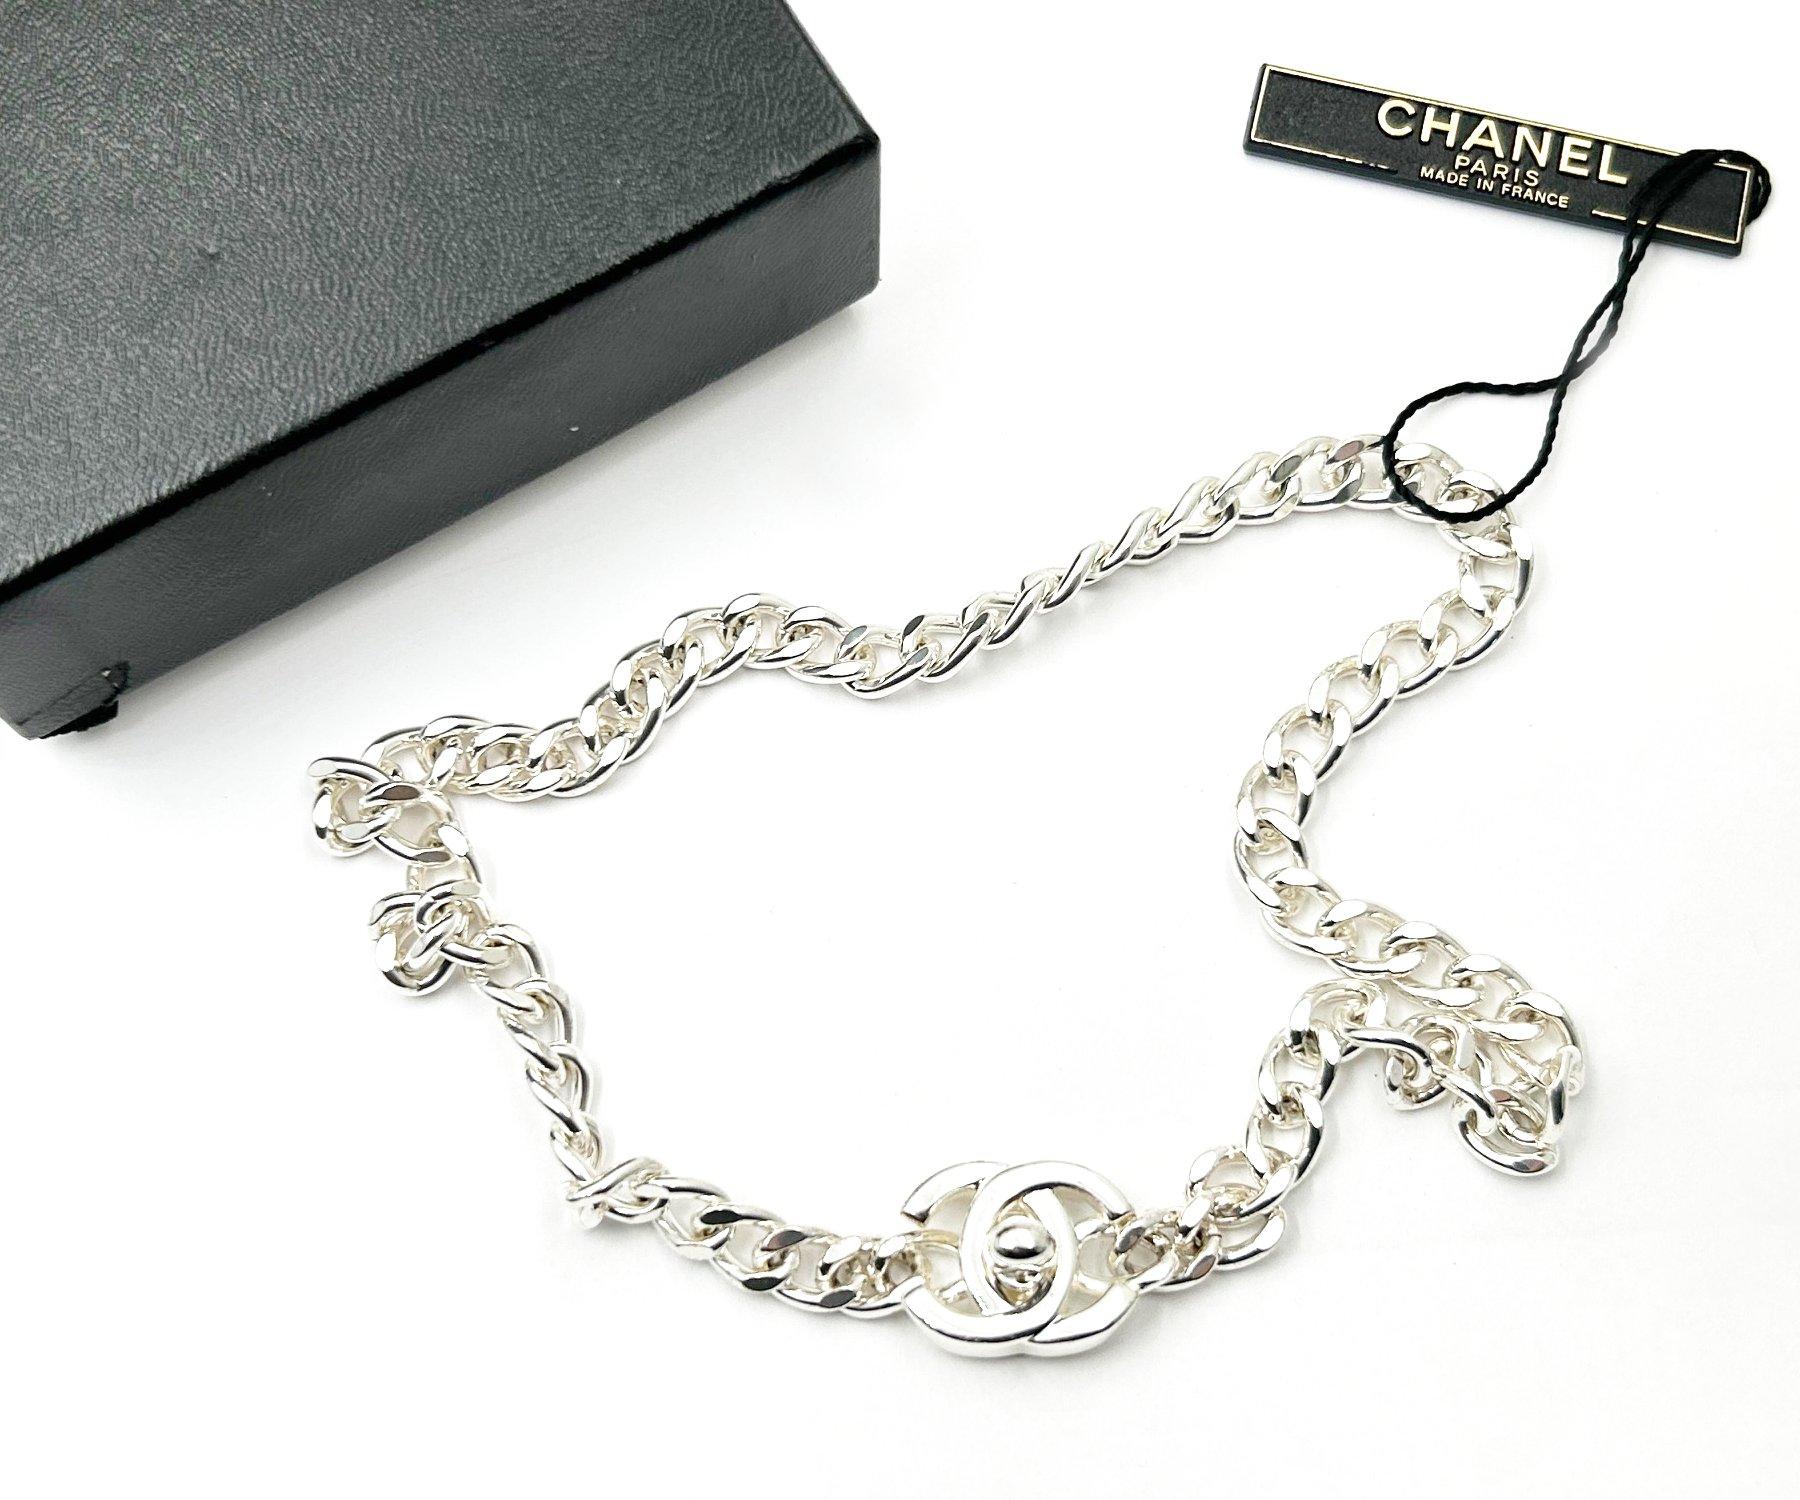 Chanel Vintage Silver CC Small Turnlock Chain Choker Necklace

*Marked 96
*Made in France
*Comes with the original box 

-It is approximately 17